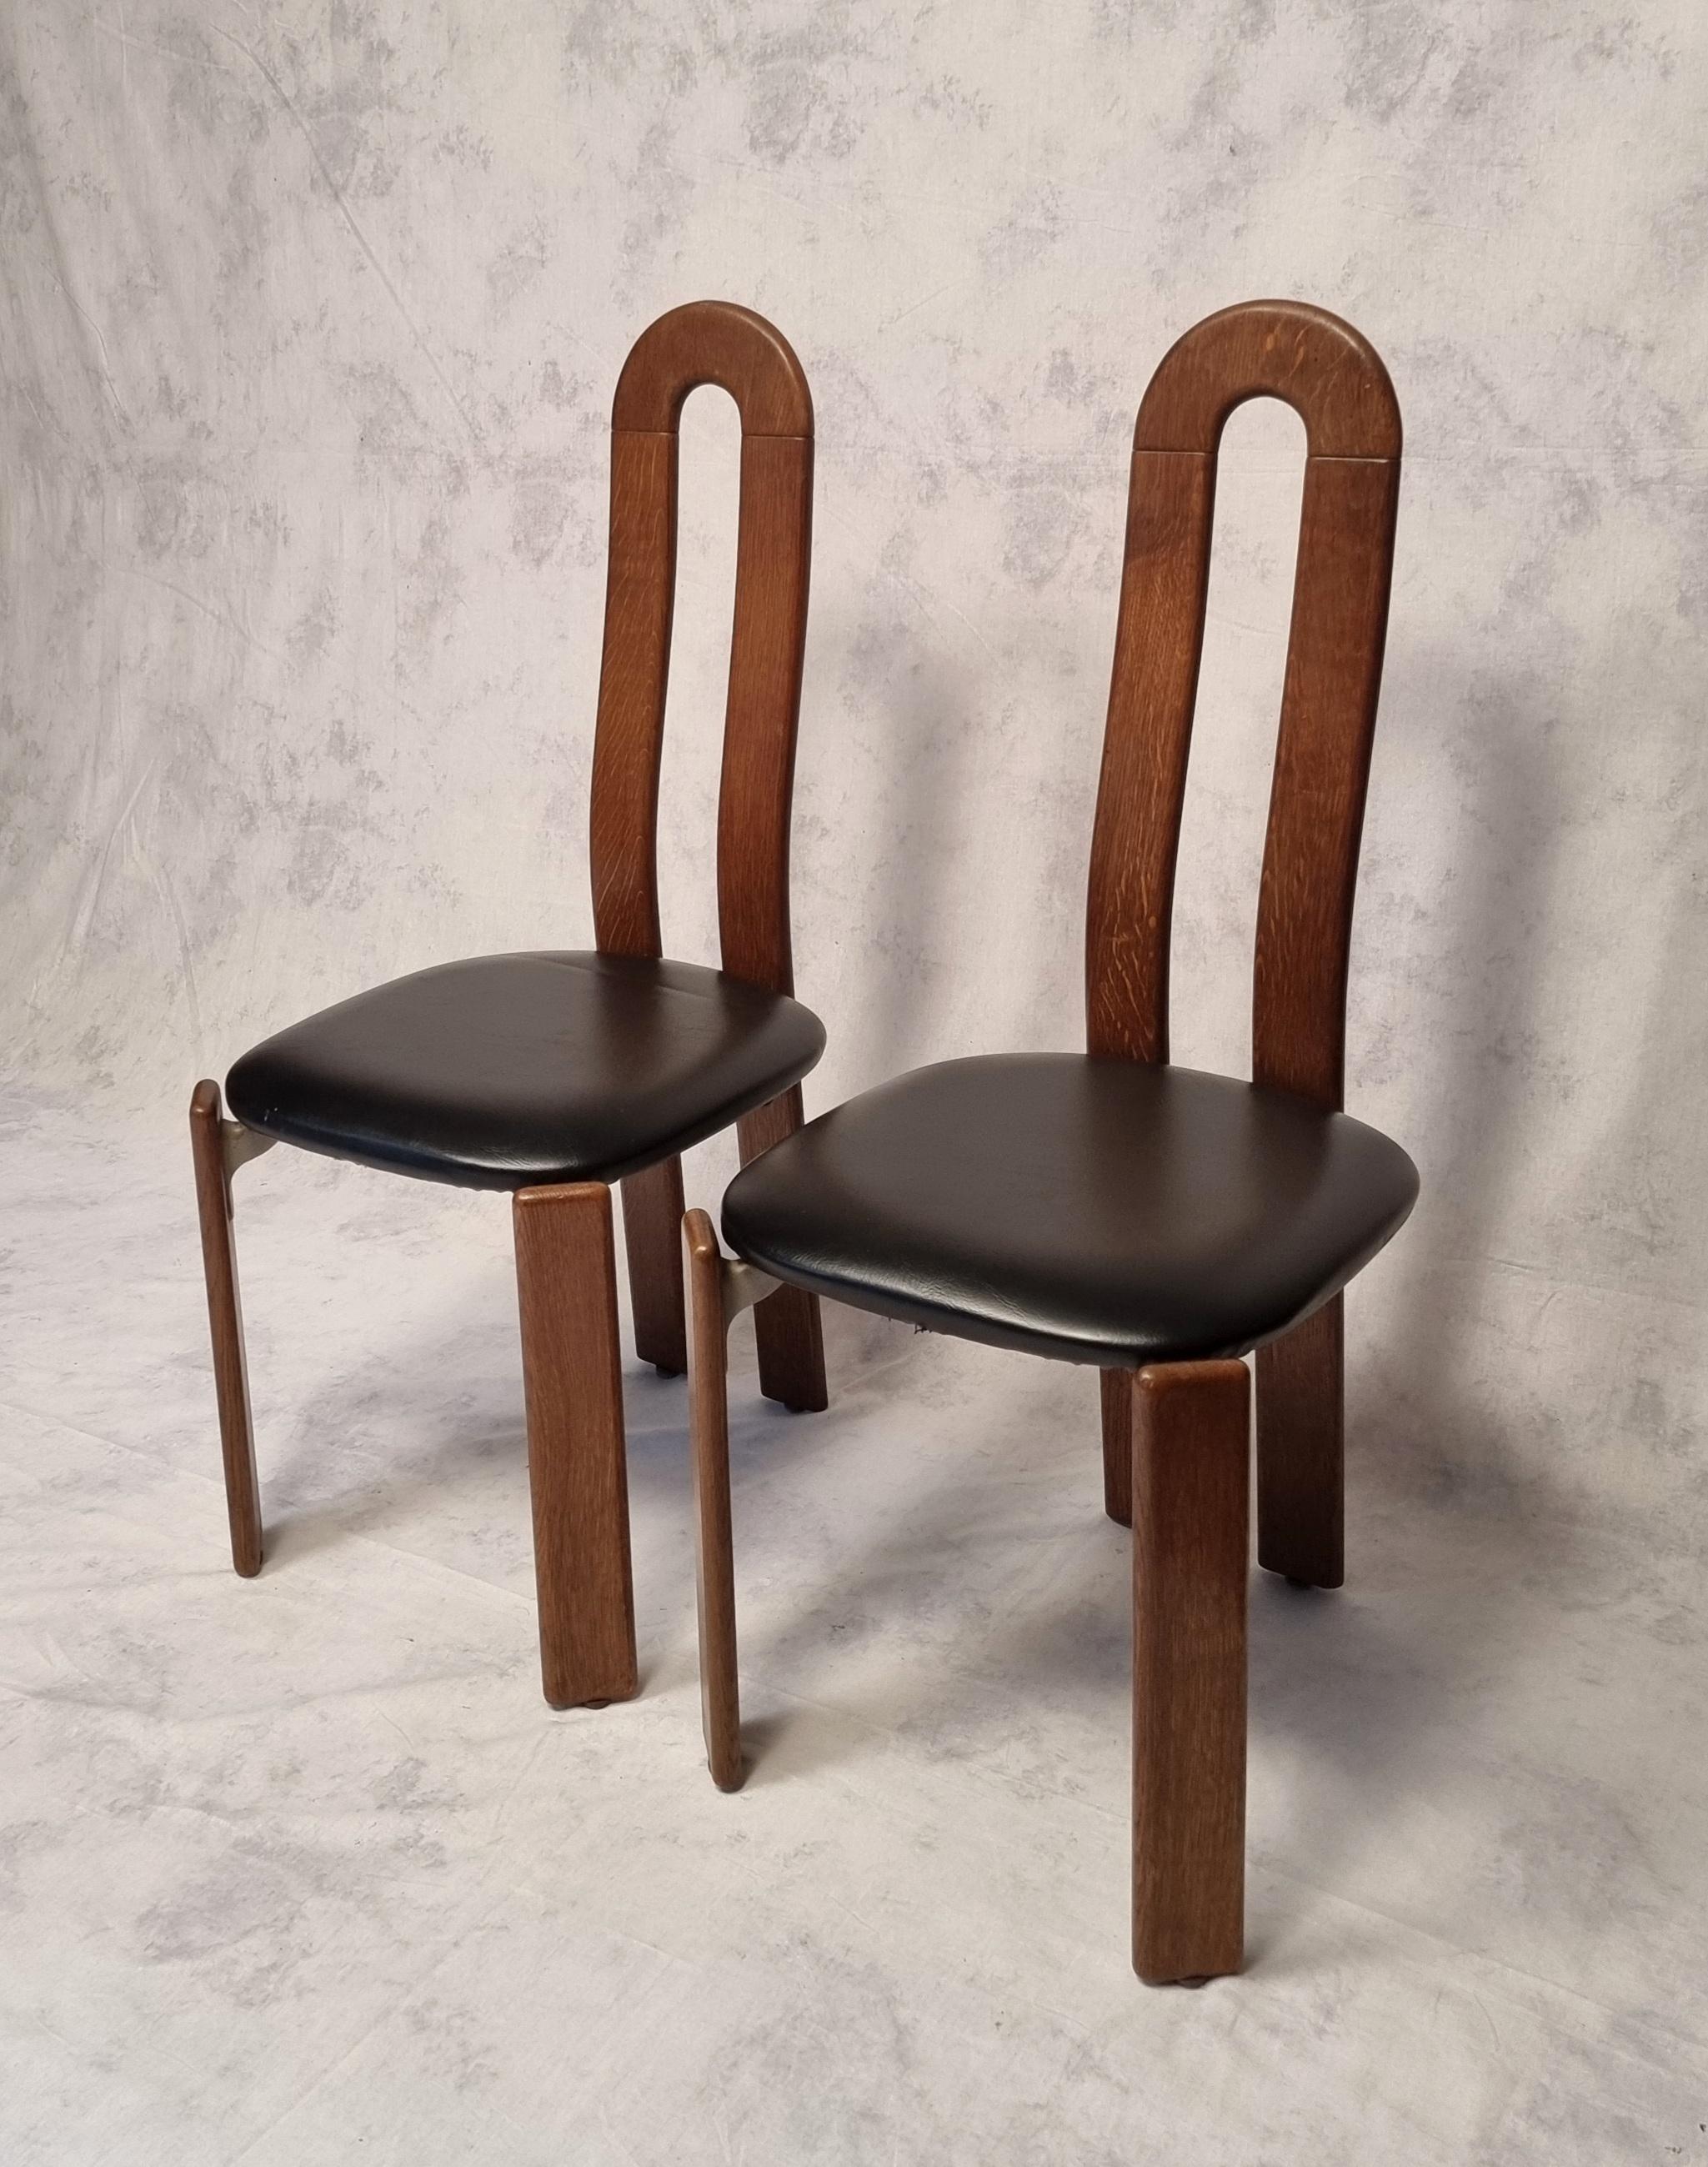 Superb and rare pair of chairs by well-known Swiss designer Bruno Rey. This pair is edited by its historical editor Dietiker and is manufactured by the Swiss workshop Stuhl aus Stein am Rhein. These high back chairs are made of solid oak. The seat